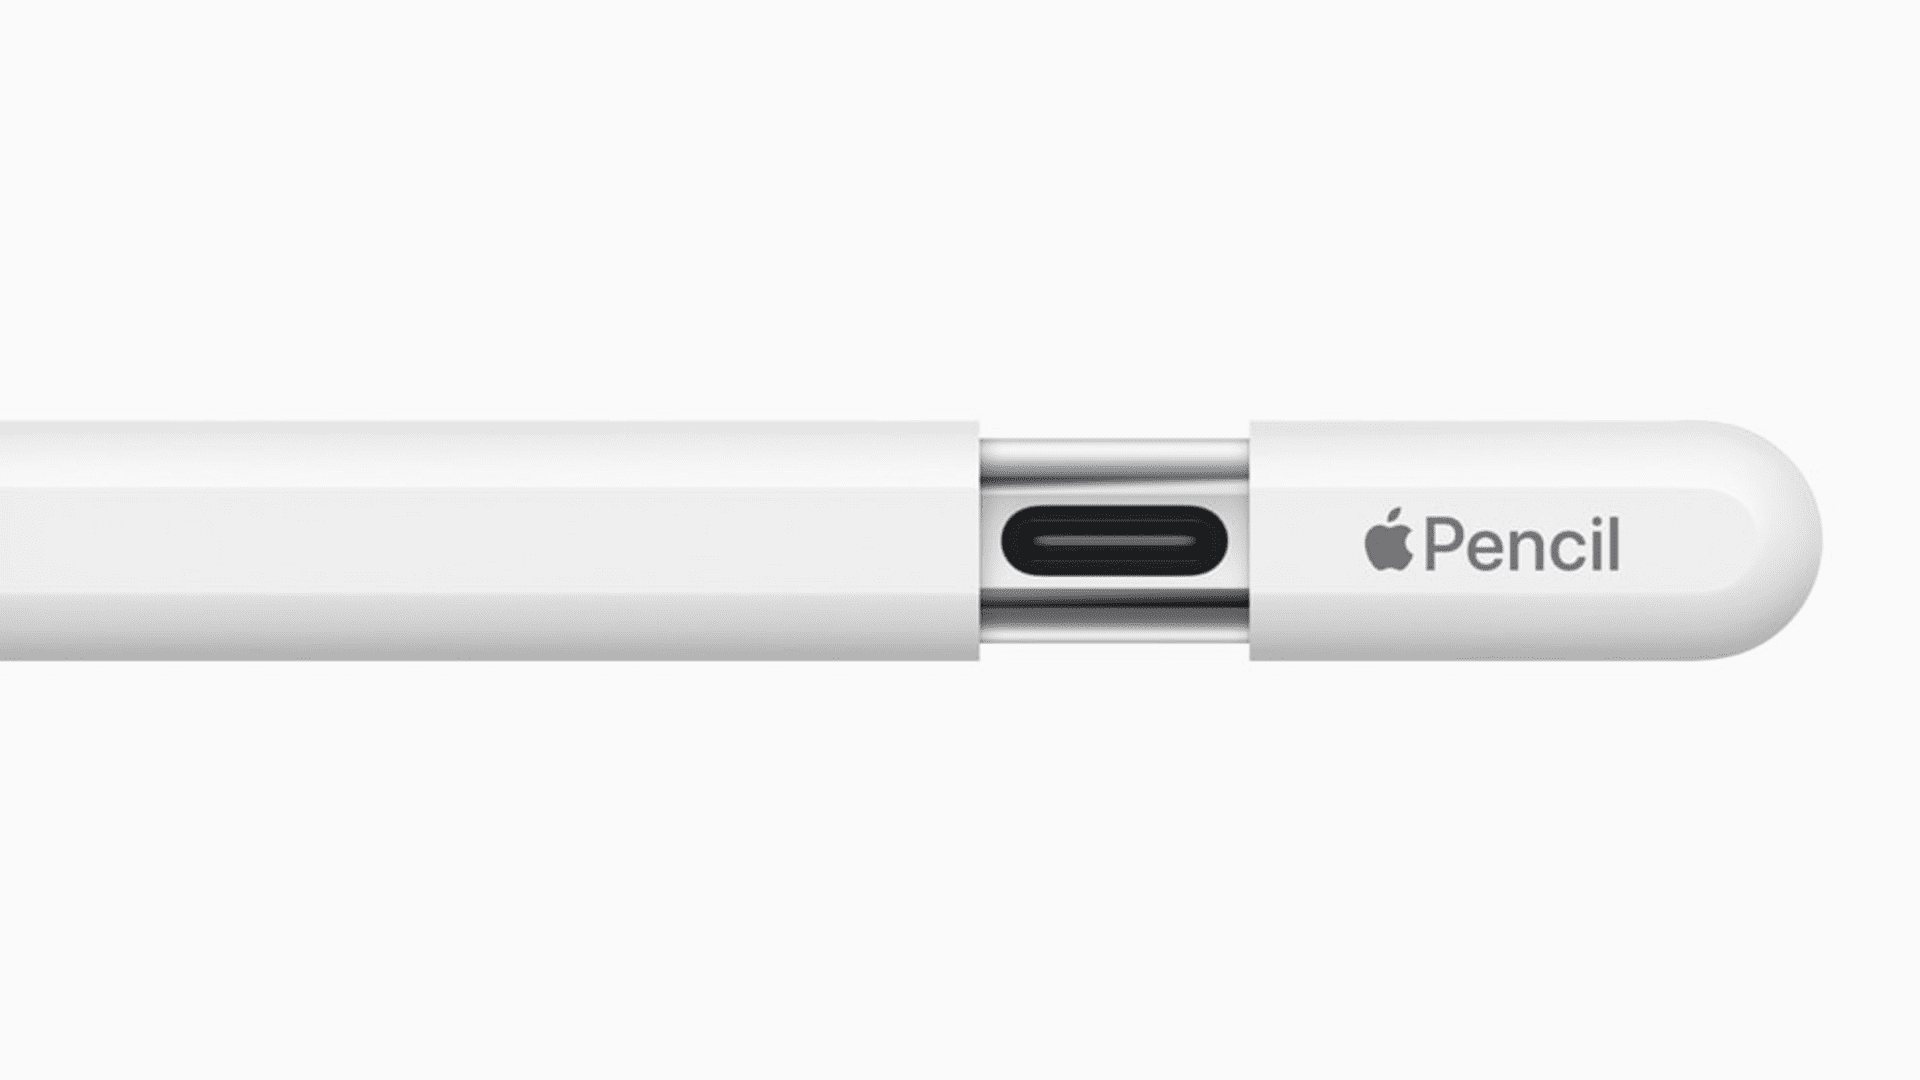 Apple Pencil USB-C Port - usb-c to apple pencil adapter how to use